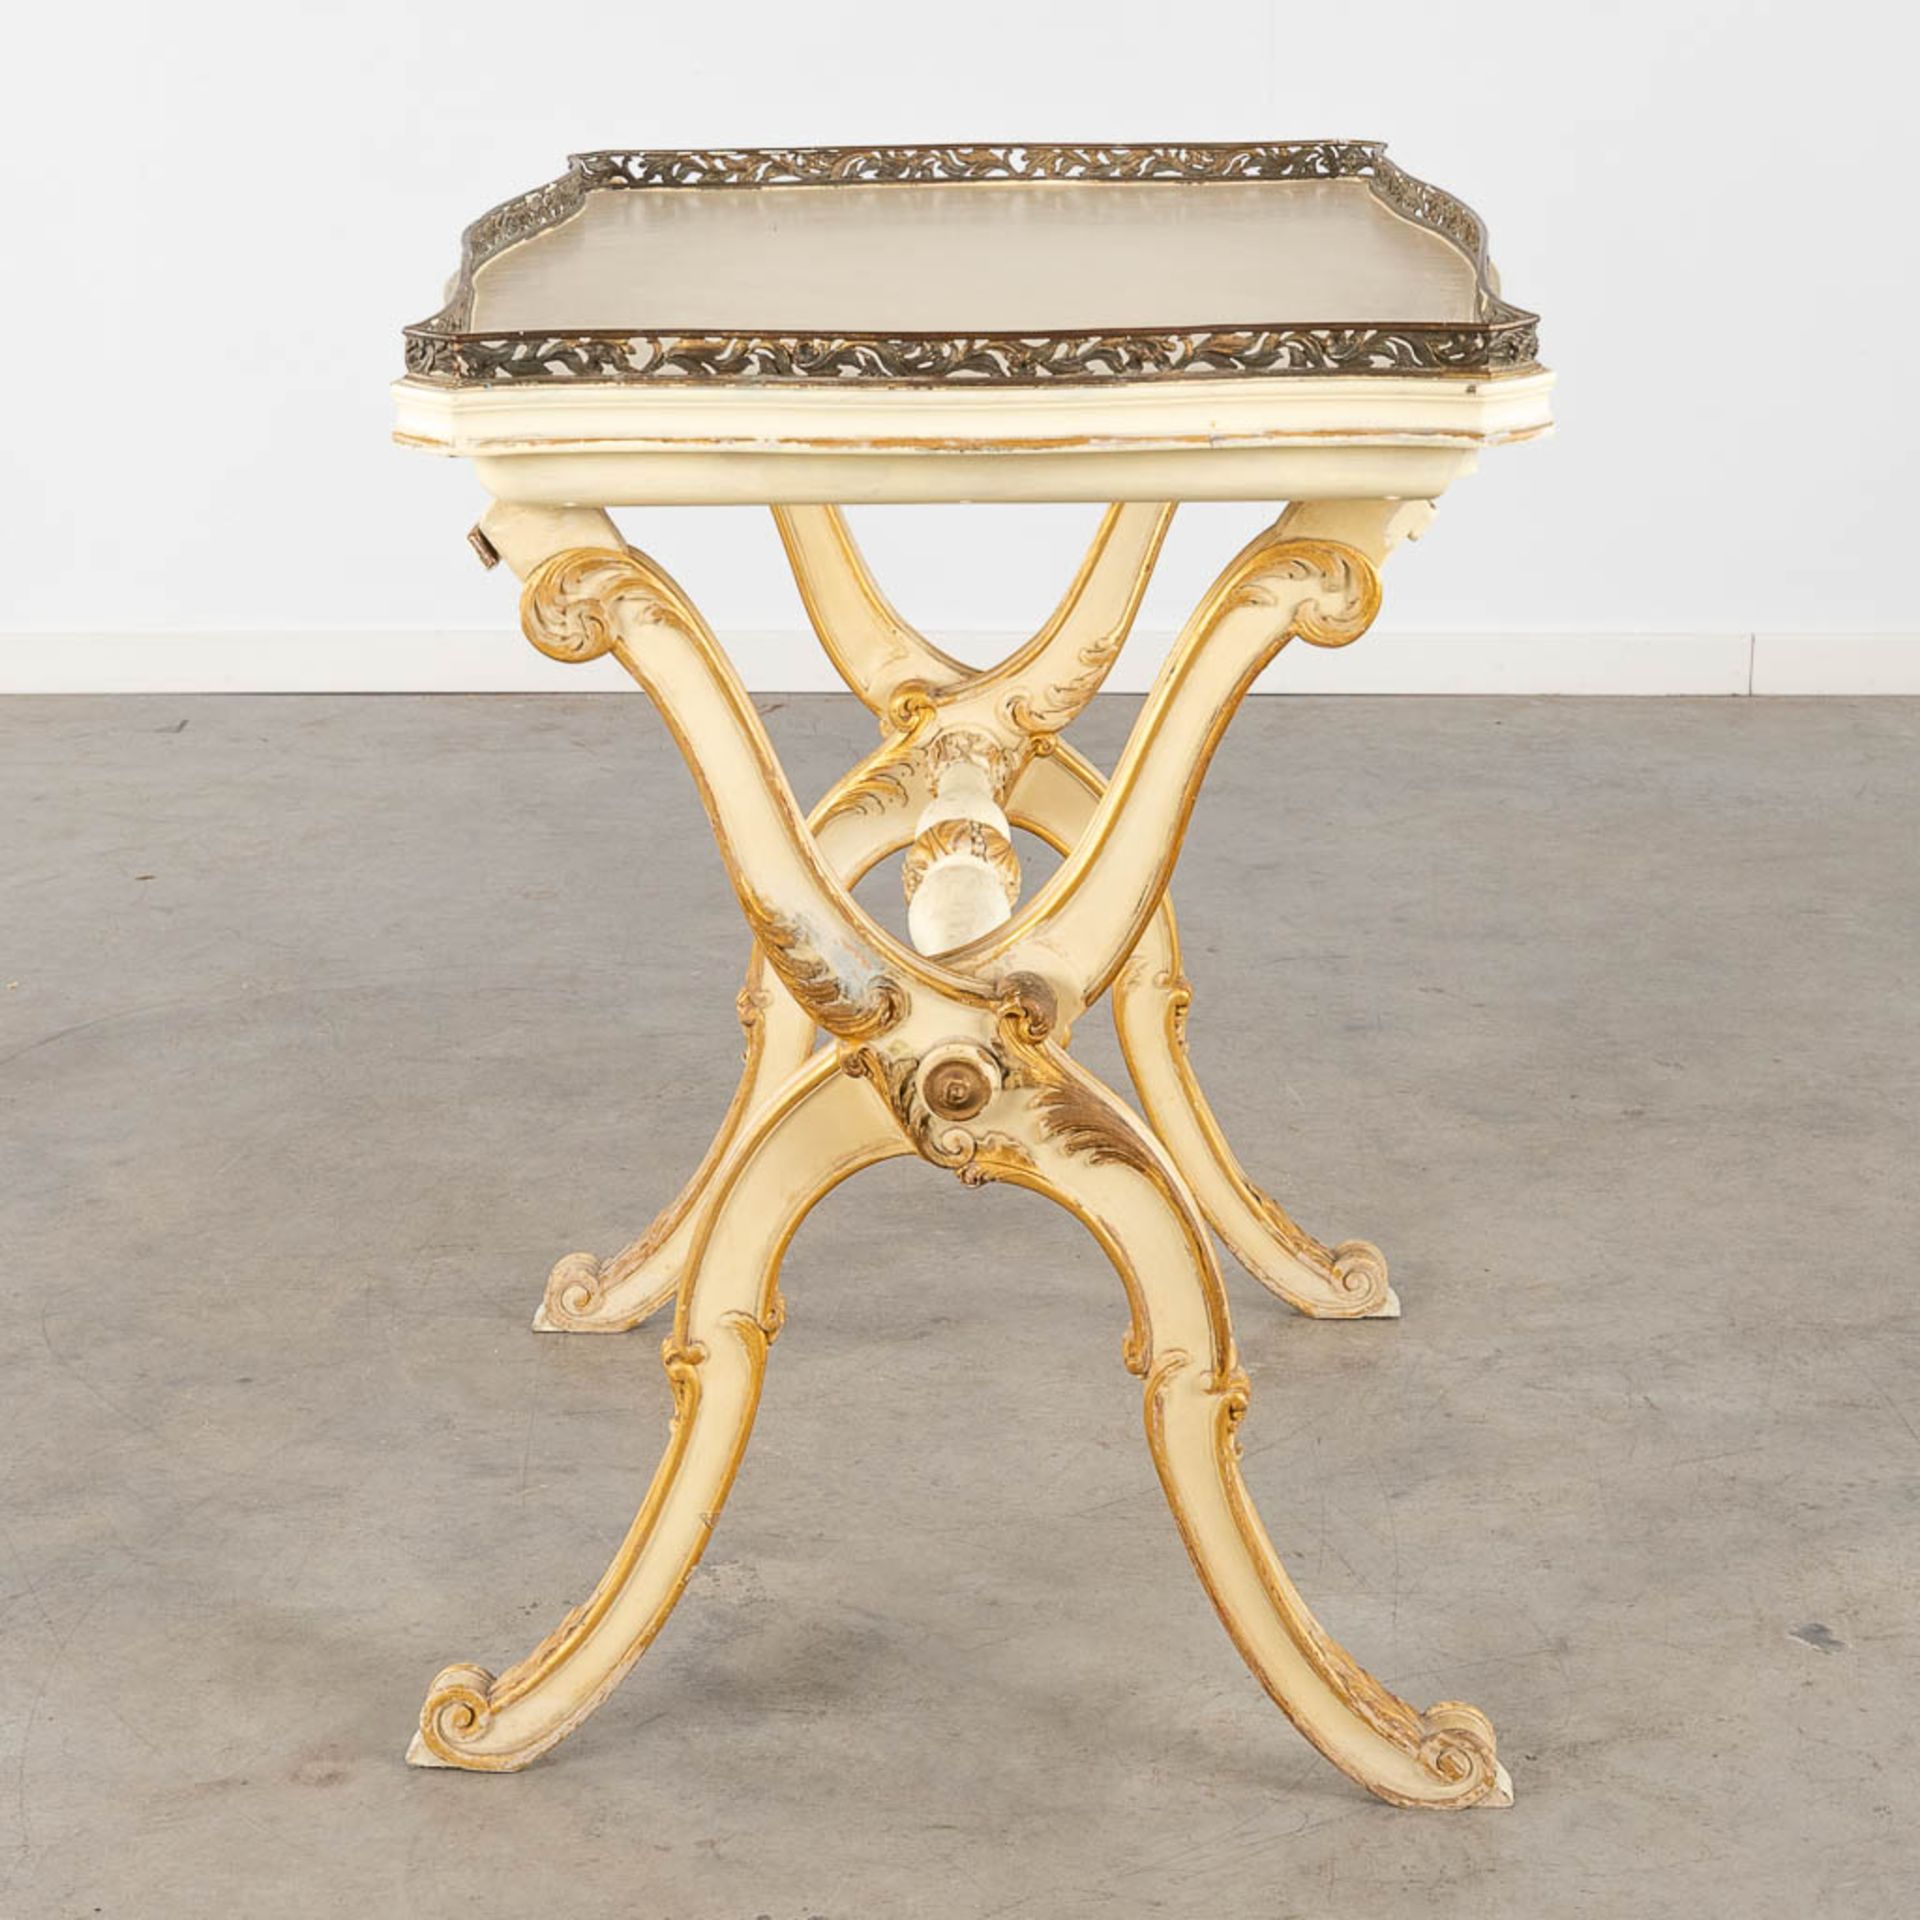 A serving table with bronze gallery, Italian style wood-sculptures. 19th C. (L:60 x W:89 x H:79 cm) - Bild 4 aus 14